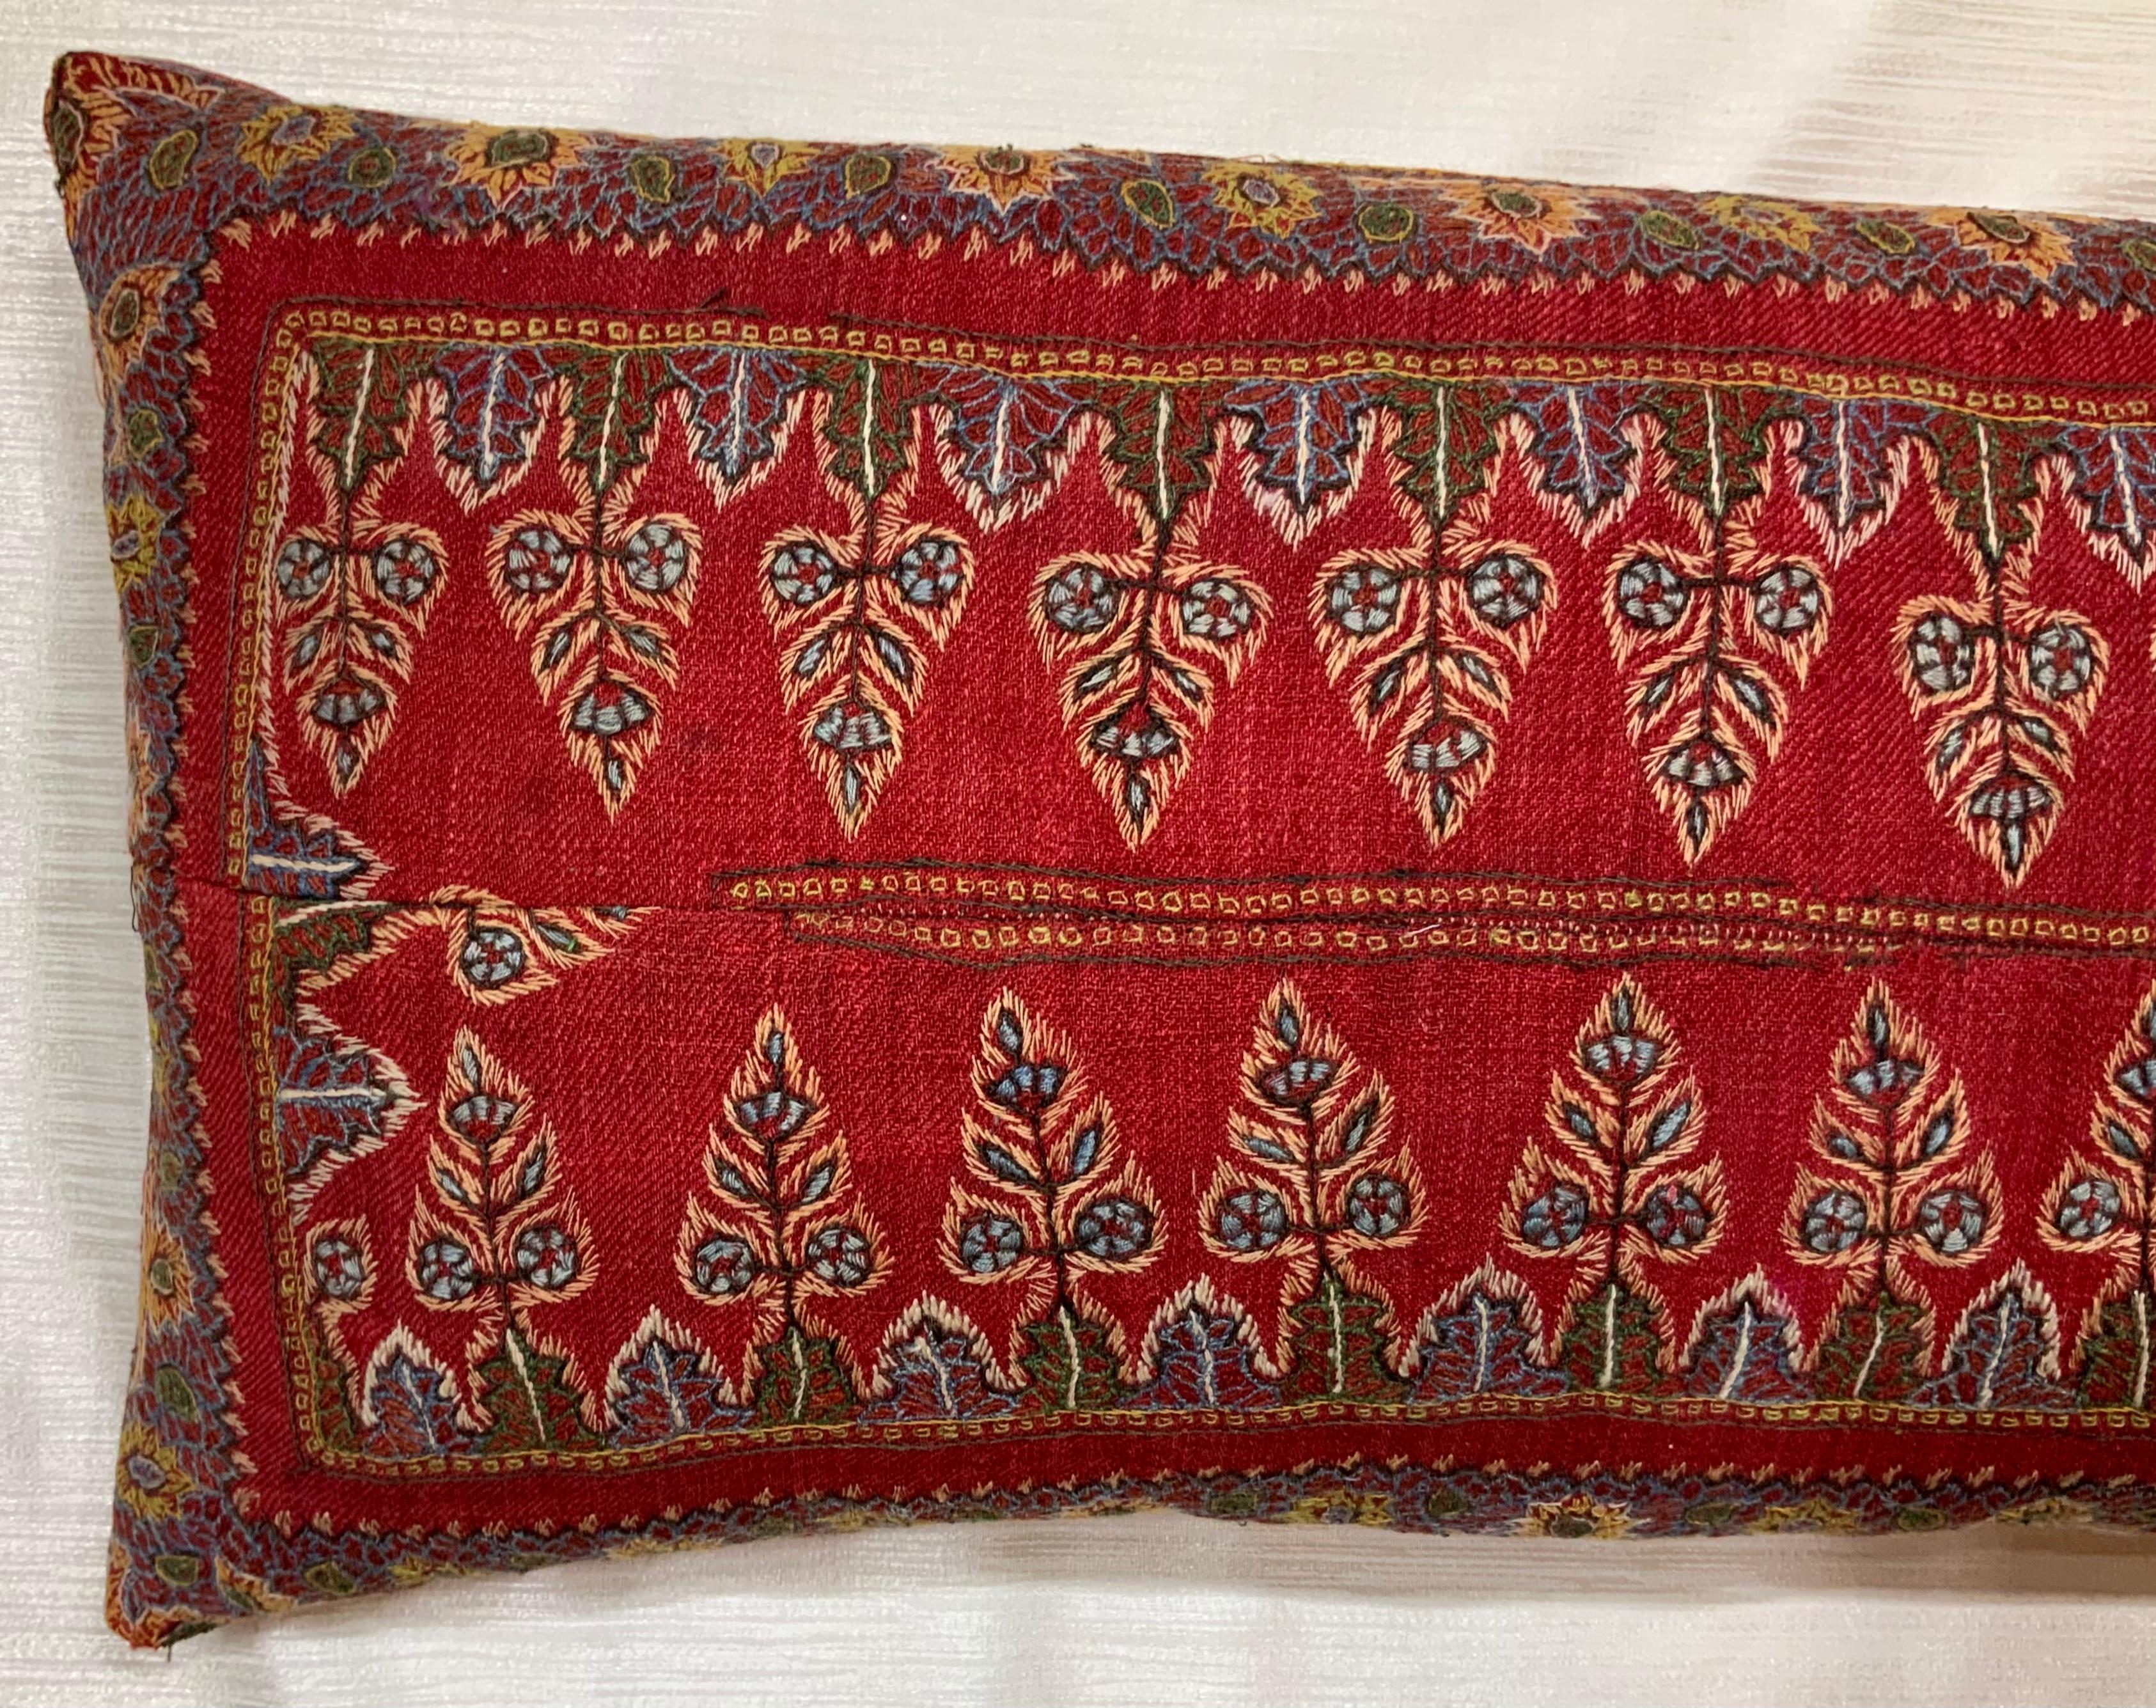 Single Hand Antique Embroidery Suzani Pillow 2